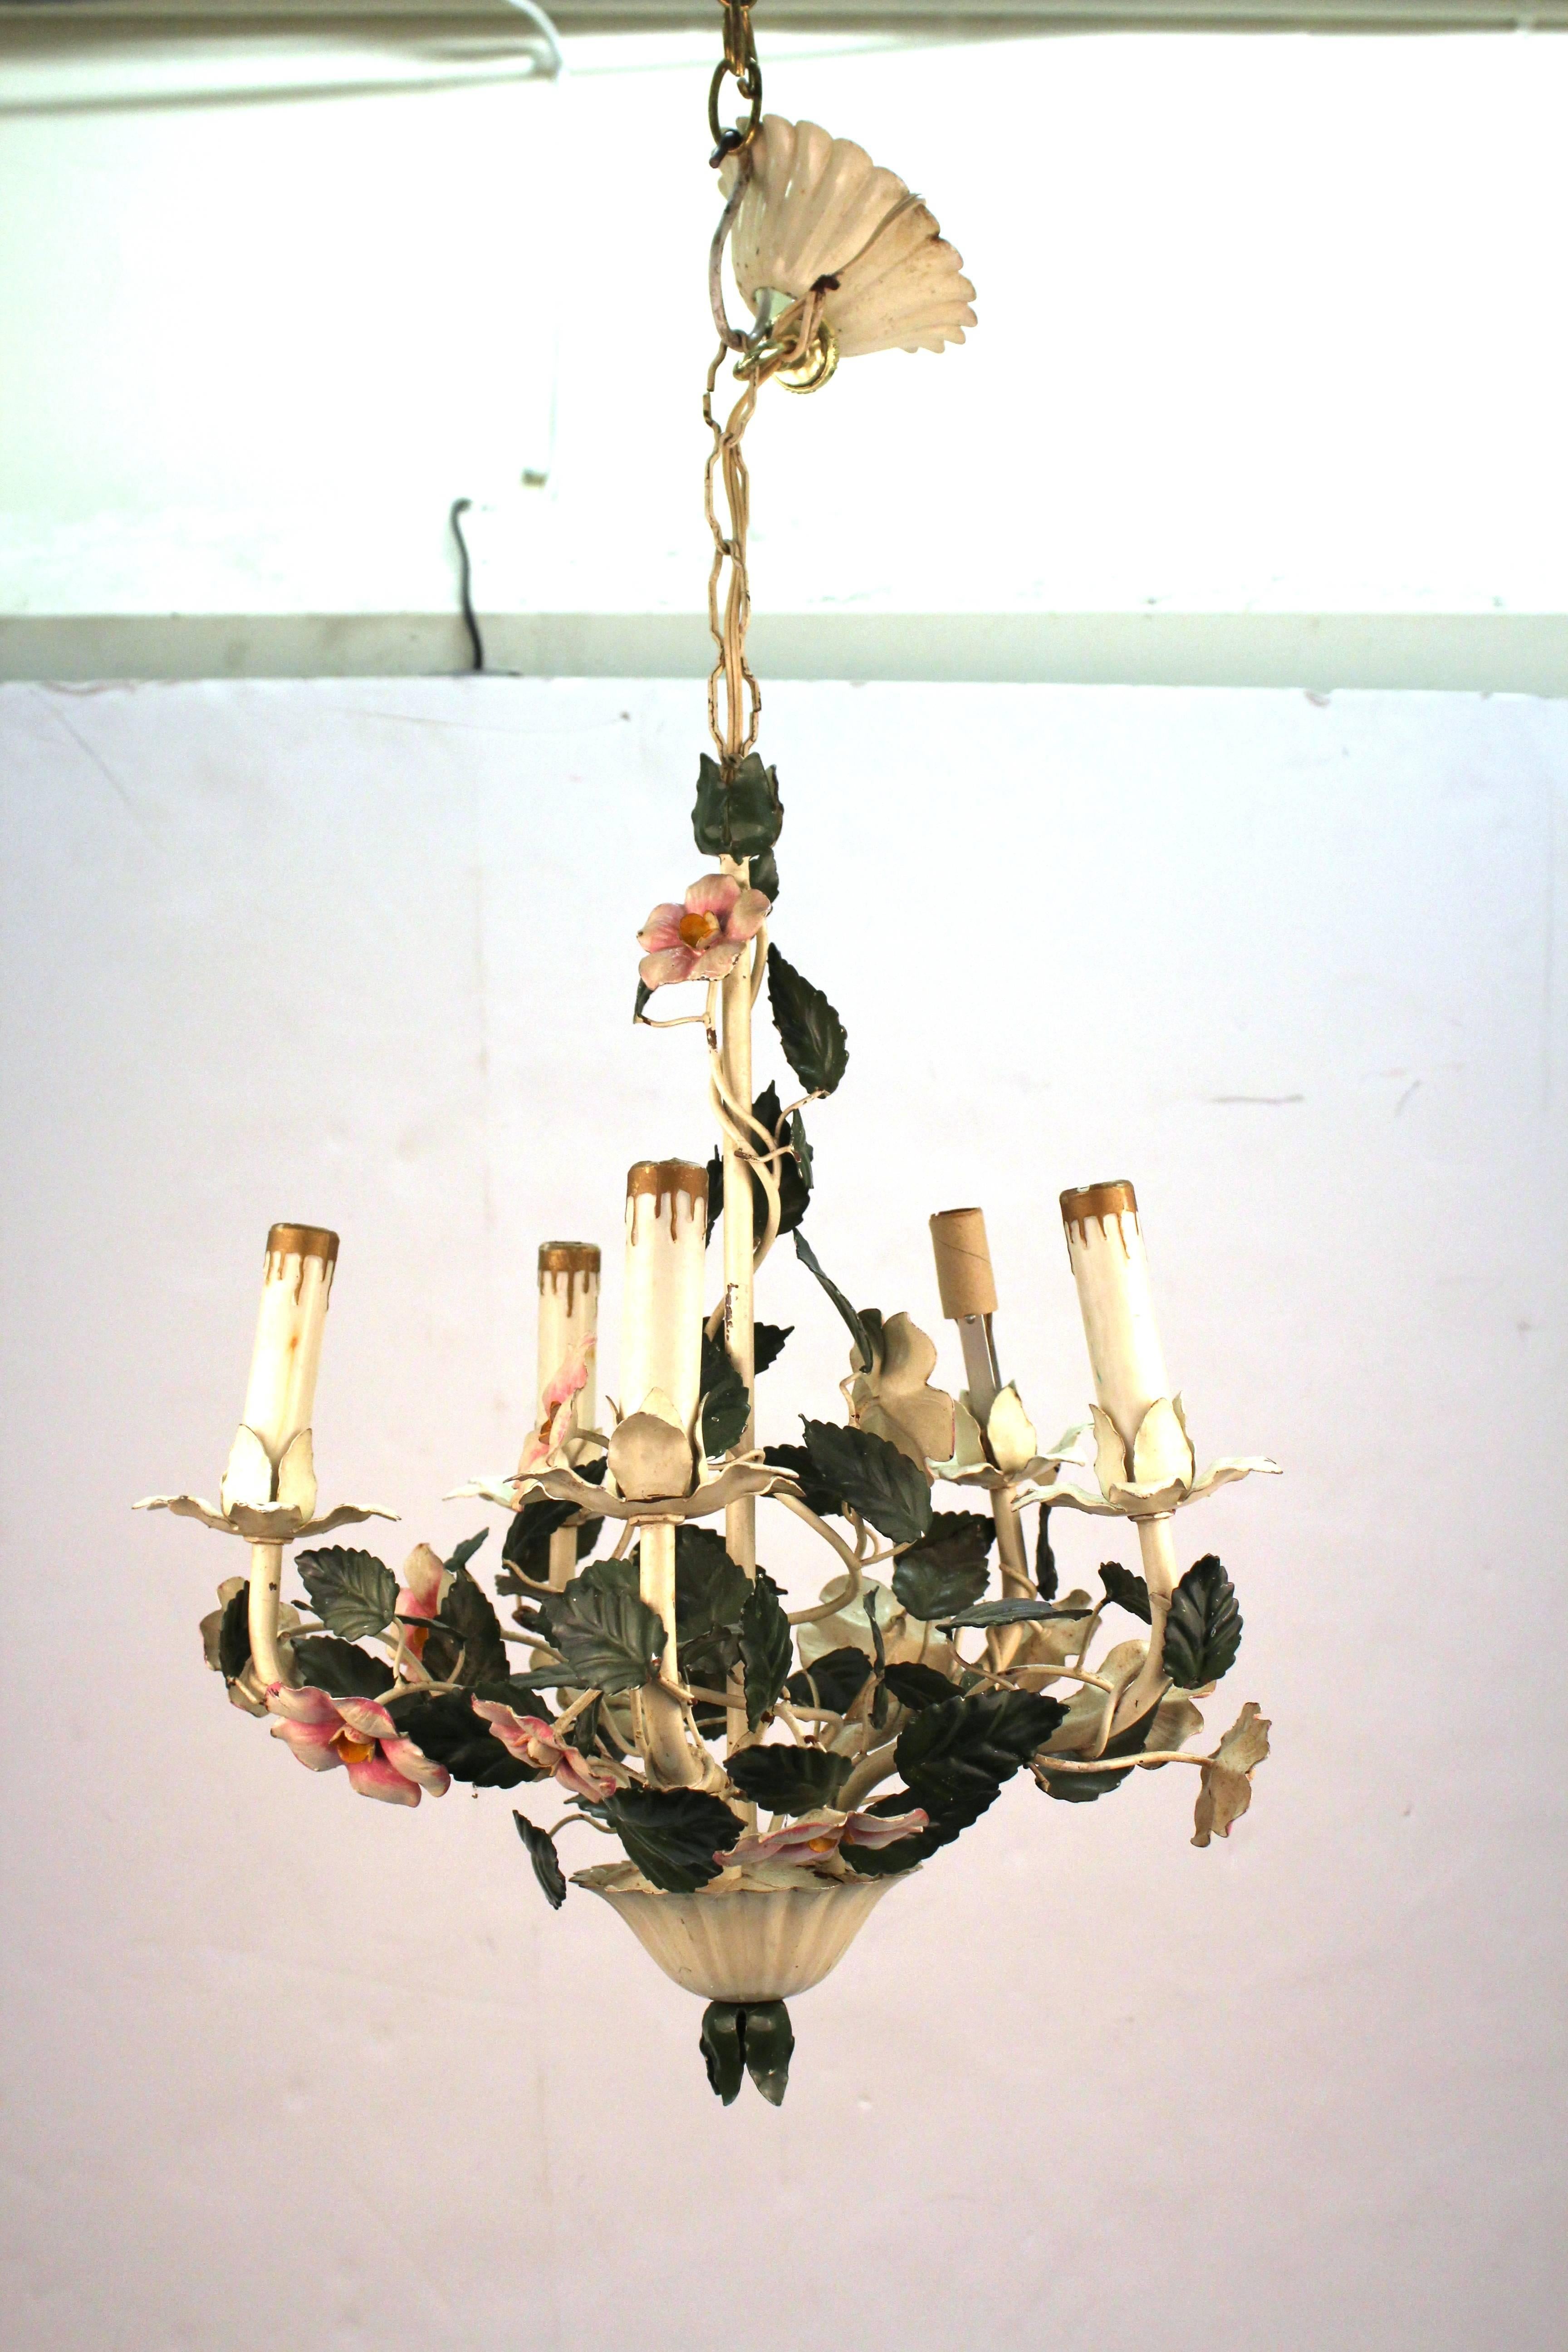 A Mid-century floral chandelier made in tole-ware. The chandelier has 5 arms and one of the light bulb holders is in need of replacement. The metal is in great vintage condition